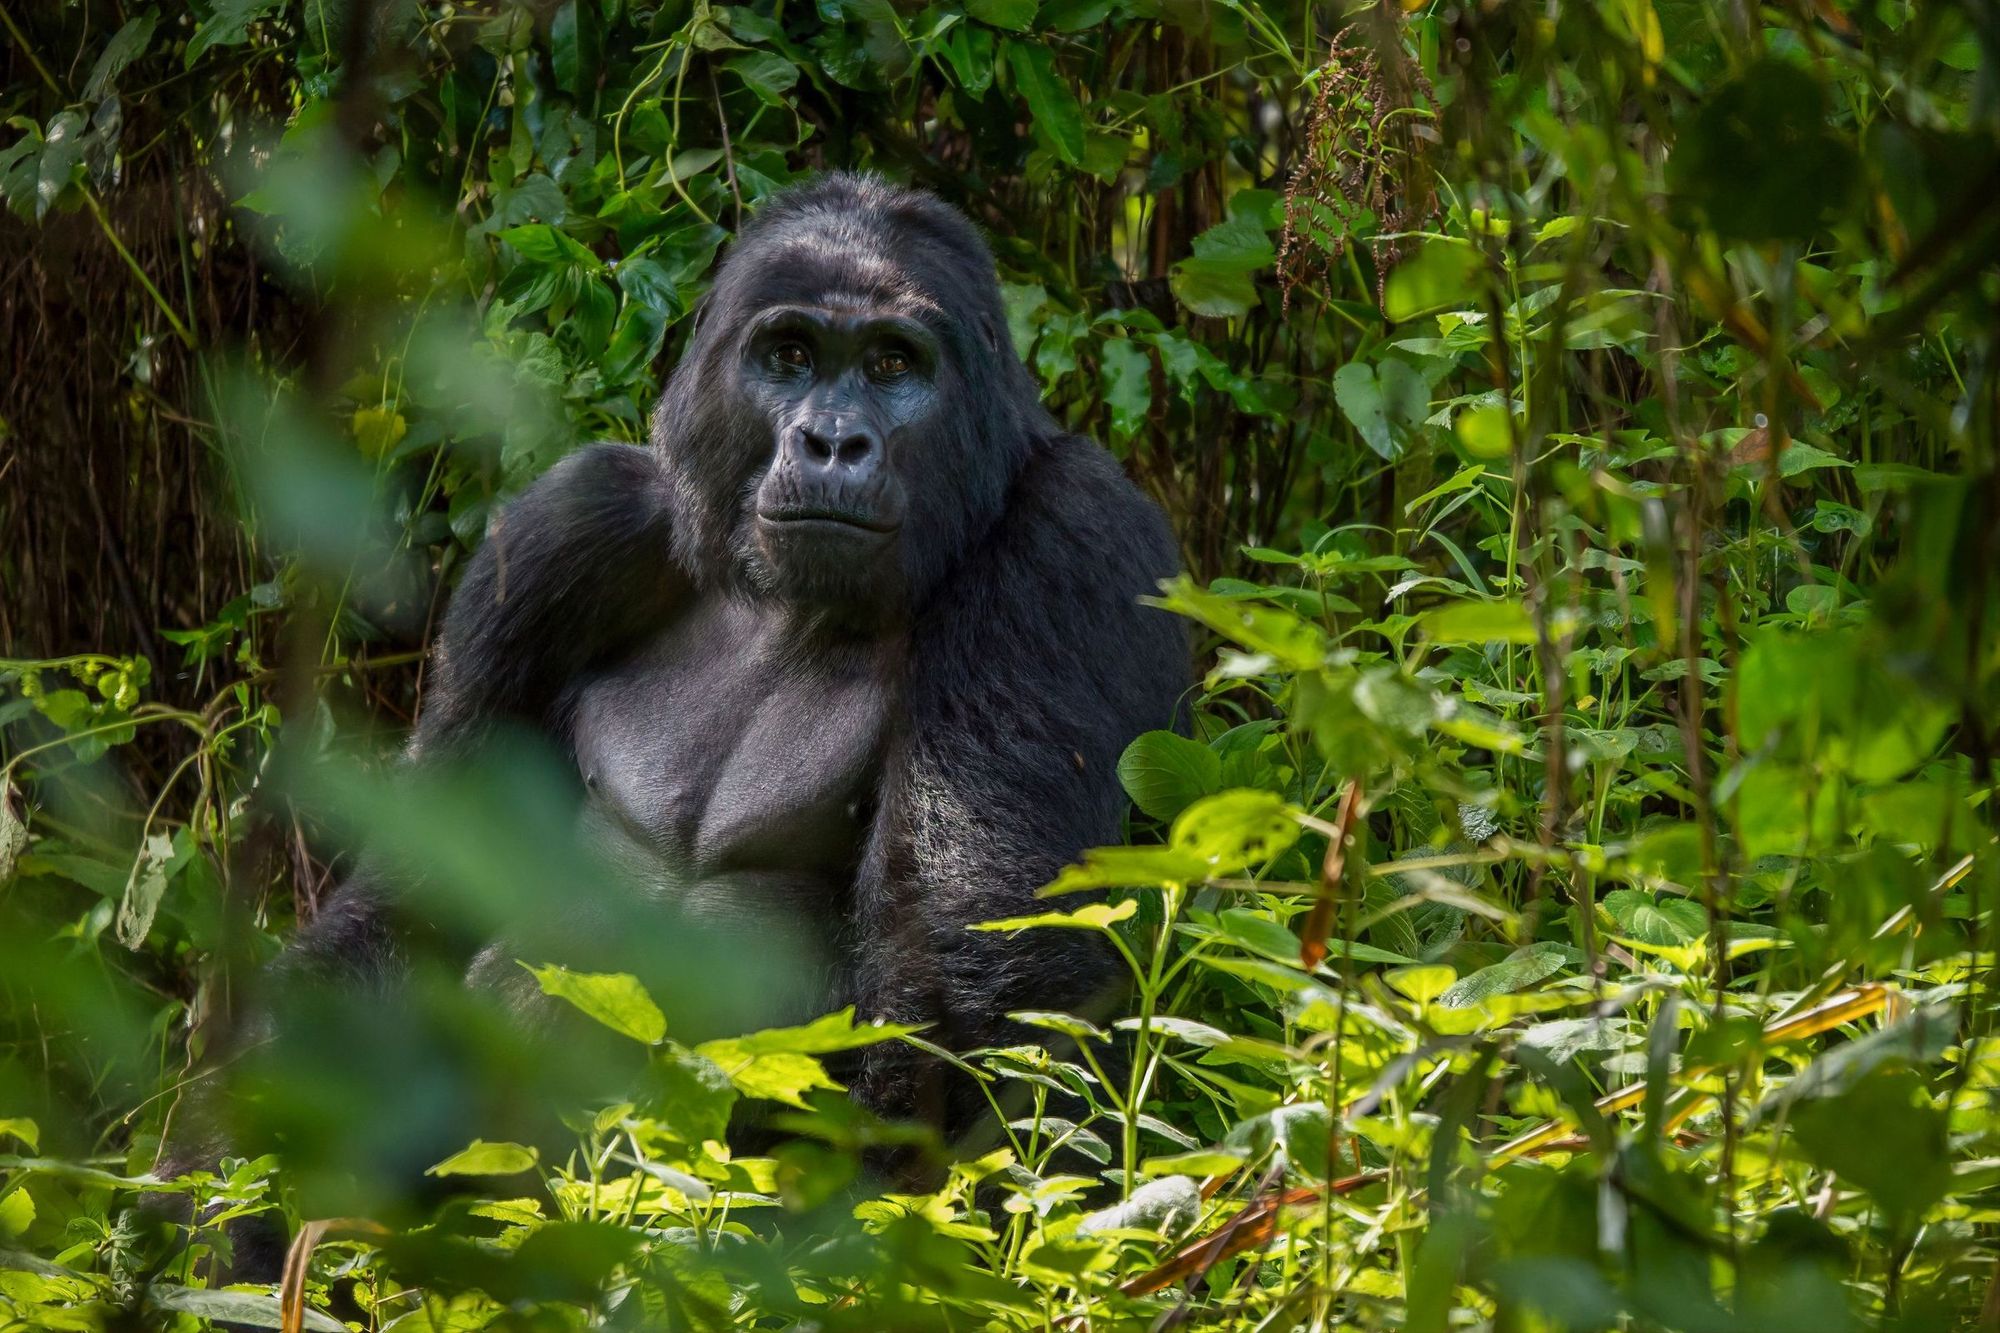 Uganda is one of the few places in the world where you can visit gorillas in their natural habitat. Photo: Getty